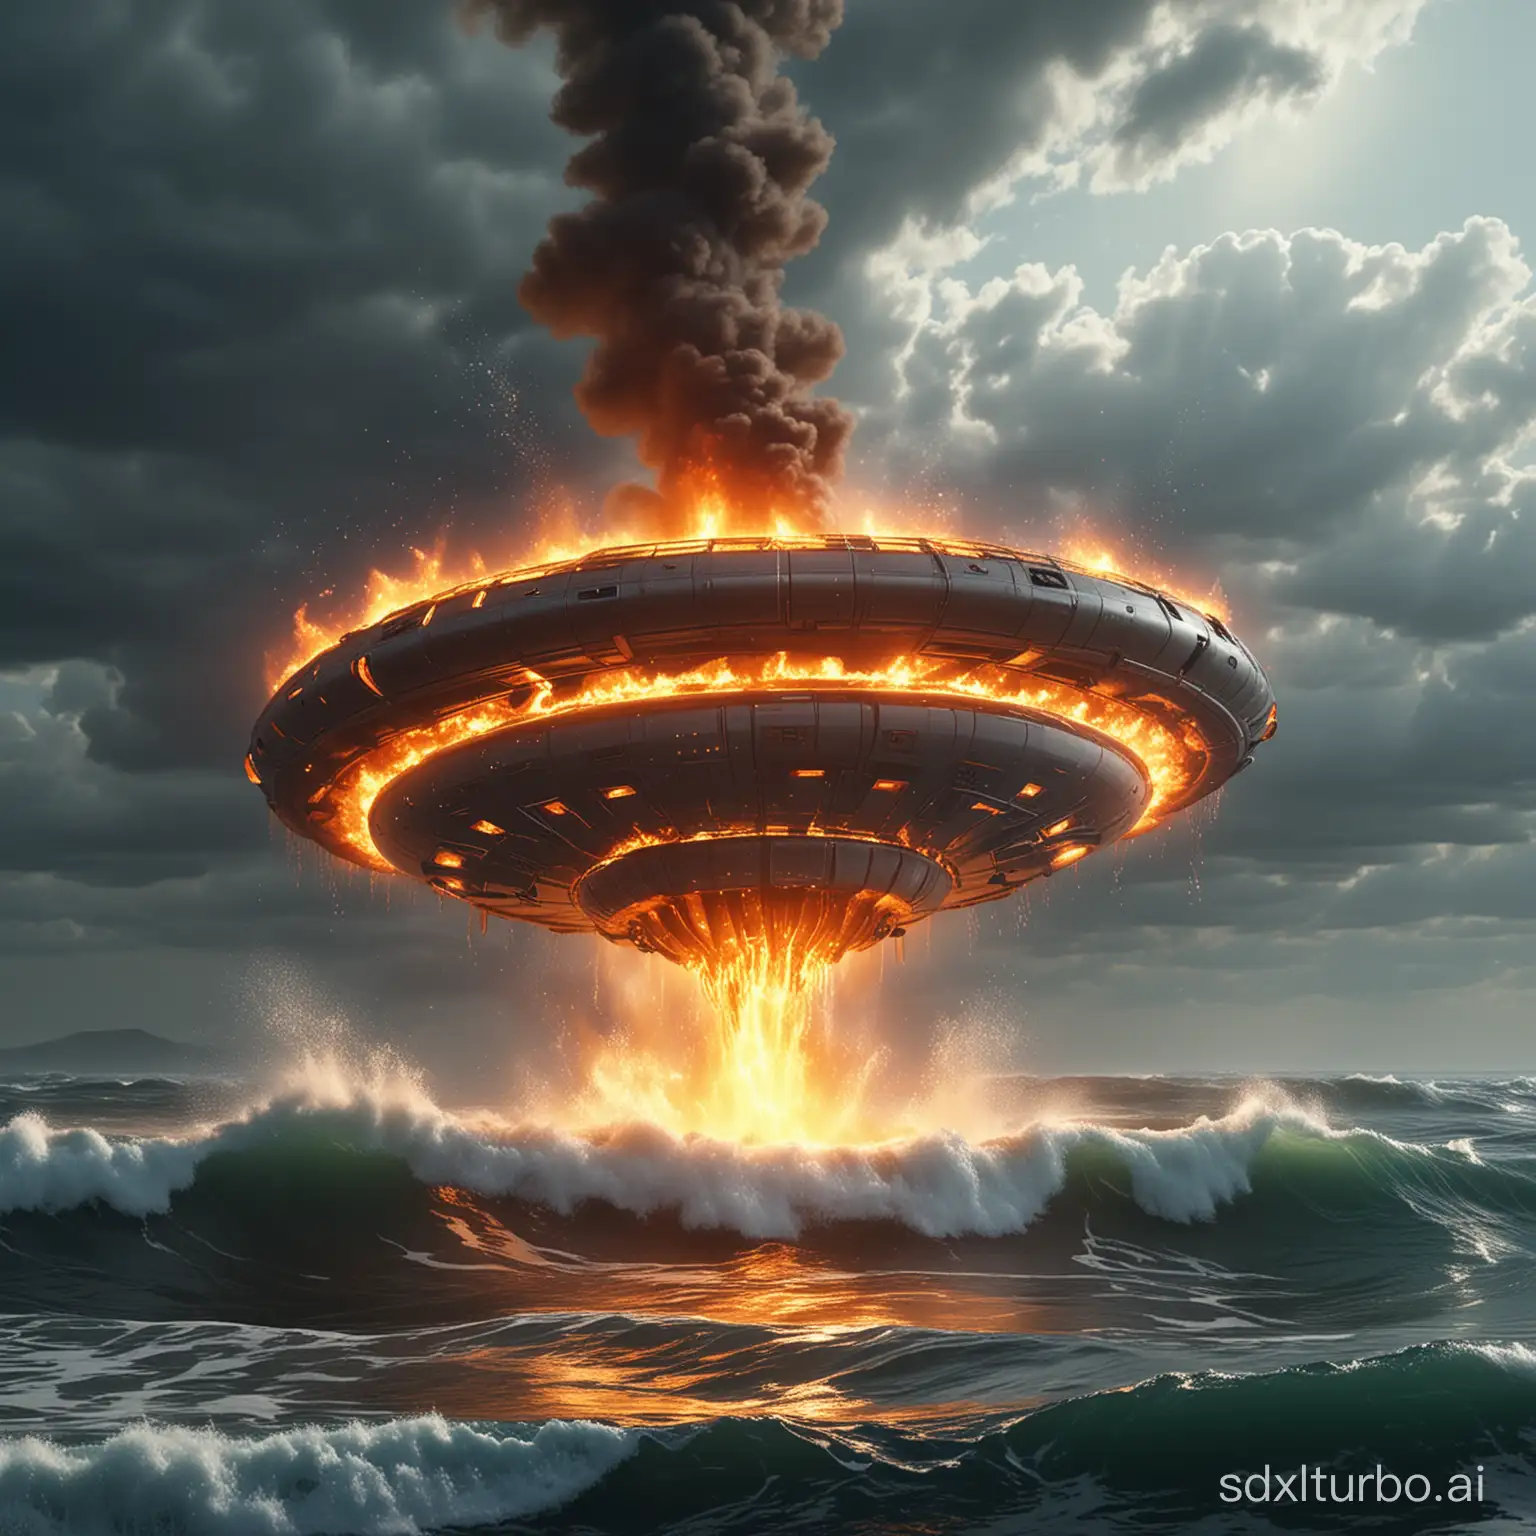 Cinematic footage, there is a burning UFO in the sea, raging flames, turbulent waves, clear details, realistic style, and ultra-high-quality pictures